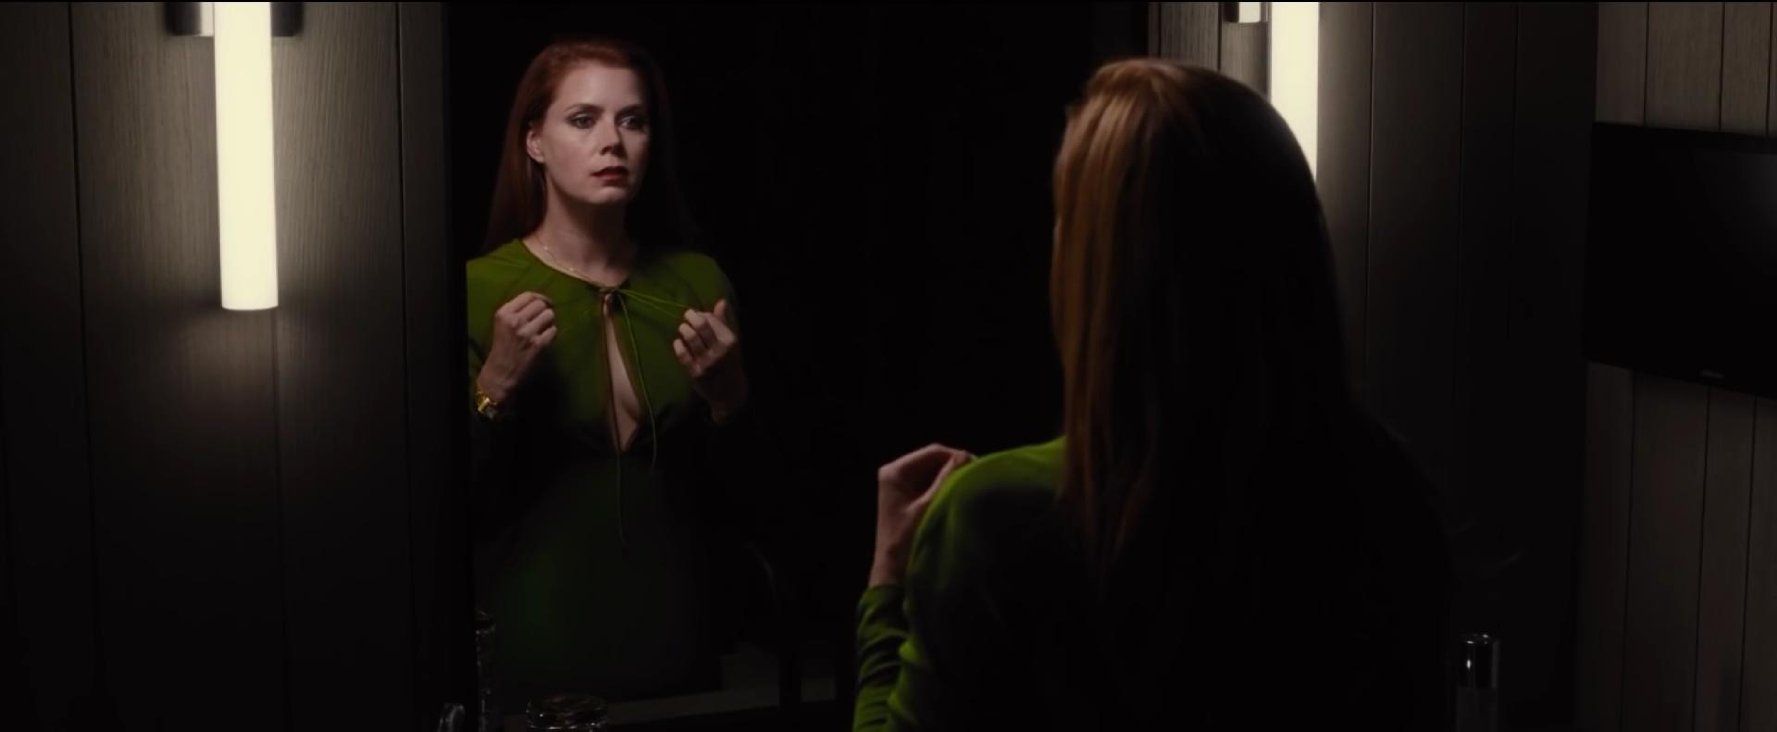 Film Review: NOCTURNAL ANIMALS. Starring: Amy Adams, Jake